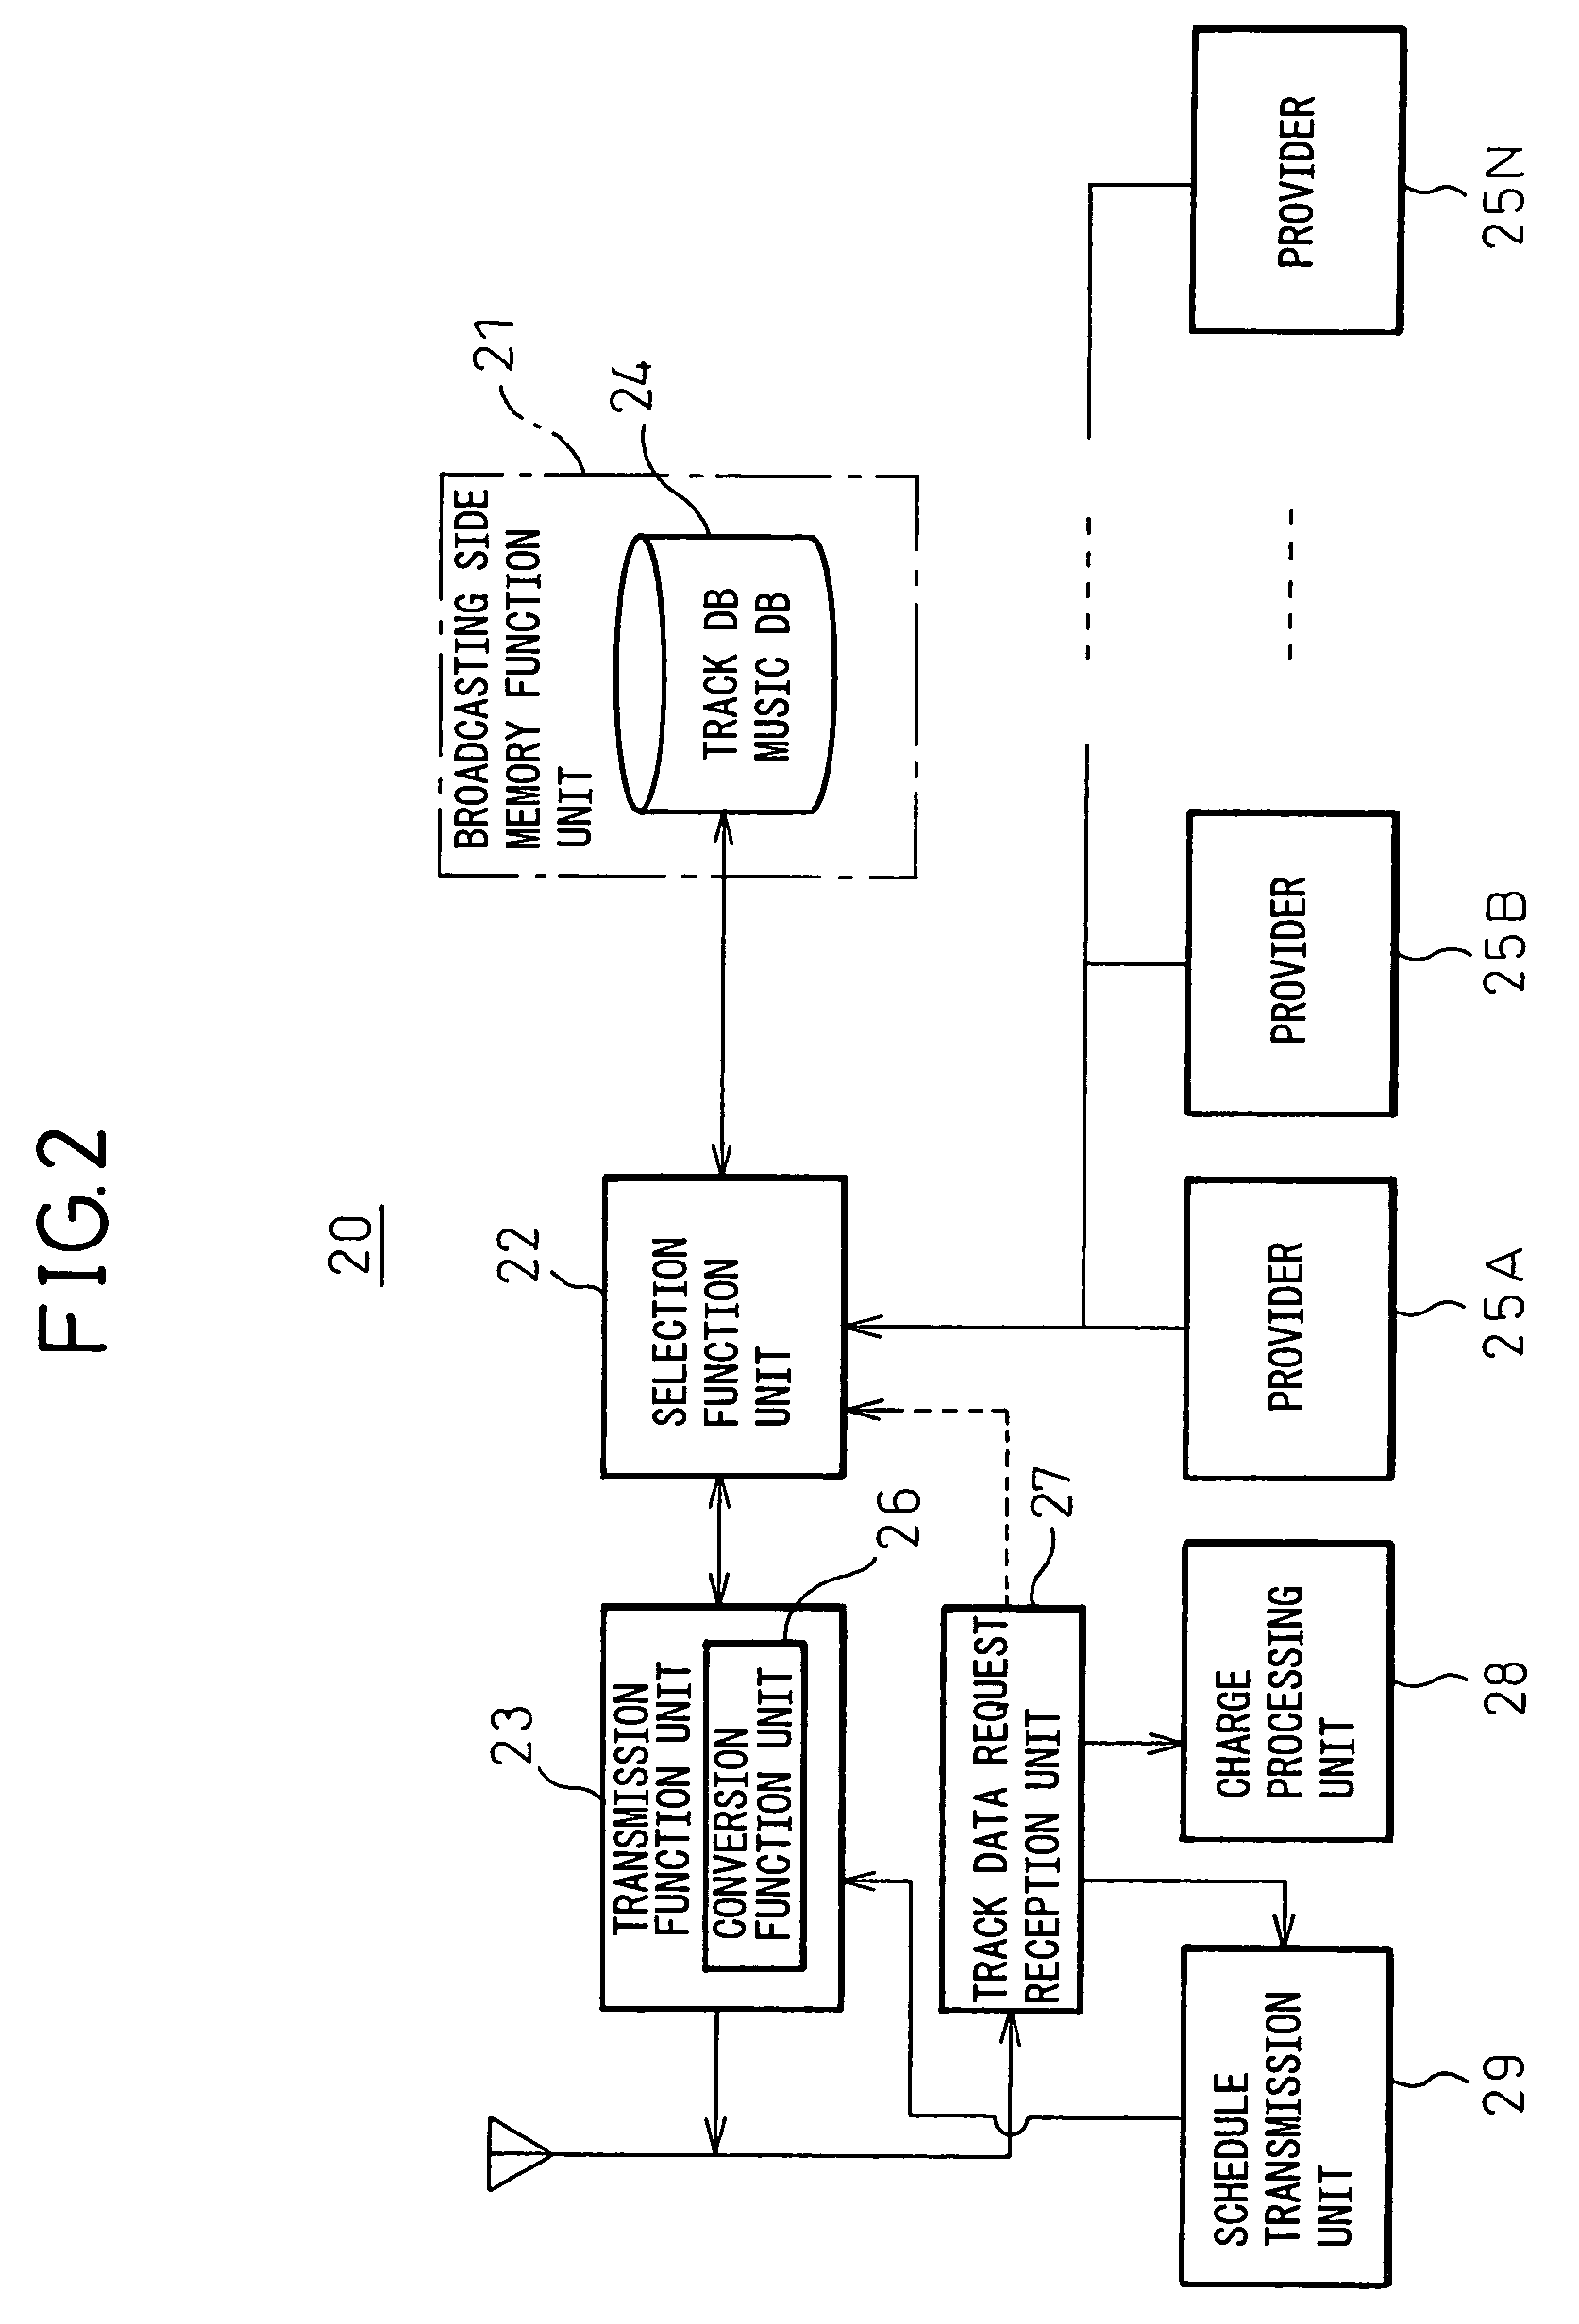 Music information, updating system, music information broadcasting apparatus, terminal apparatus having music information updating function, music information updating method, music information broadcasting method, and music information updating method of terminal apparatus